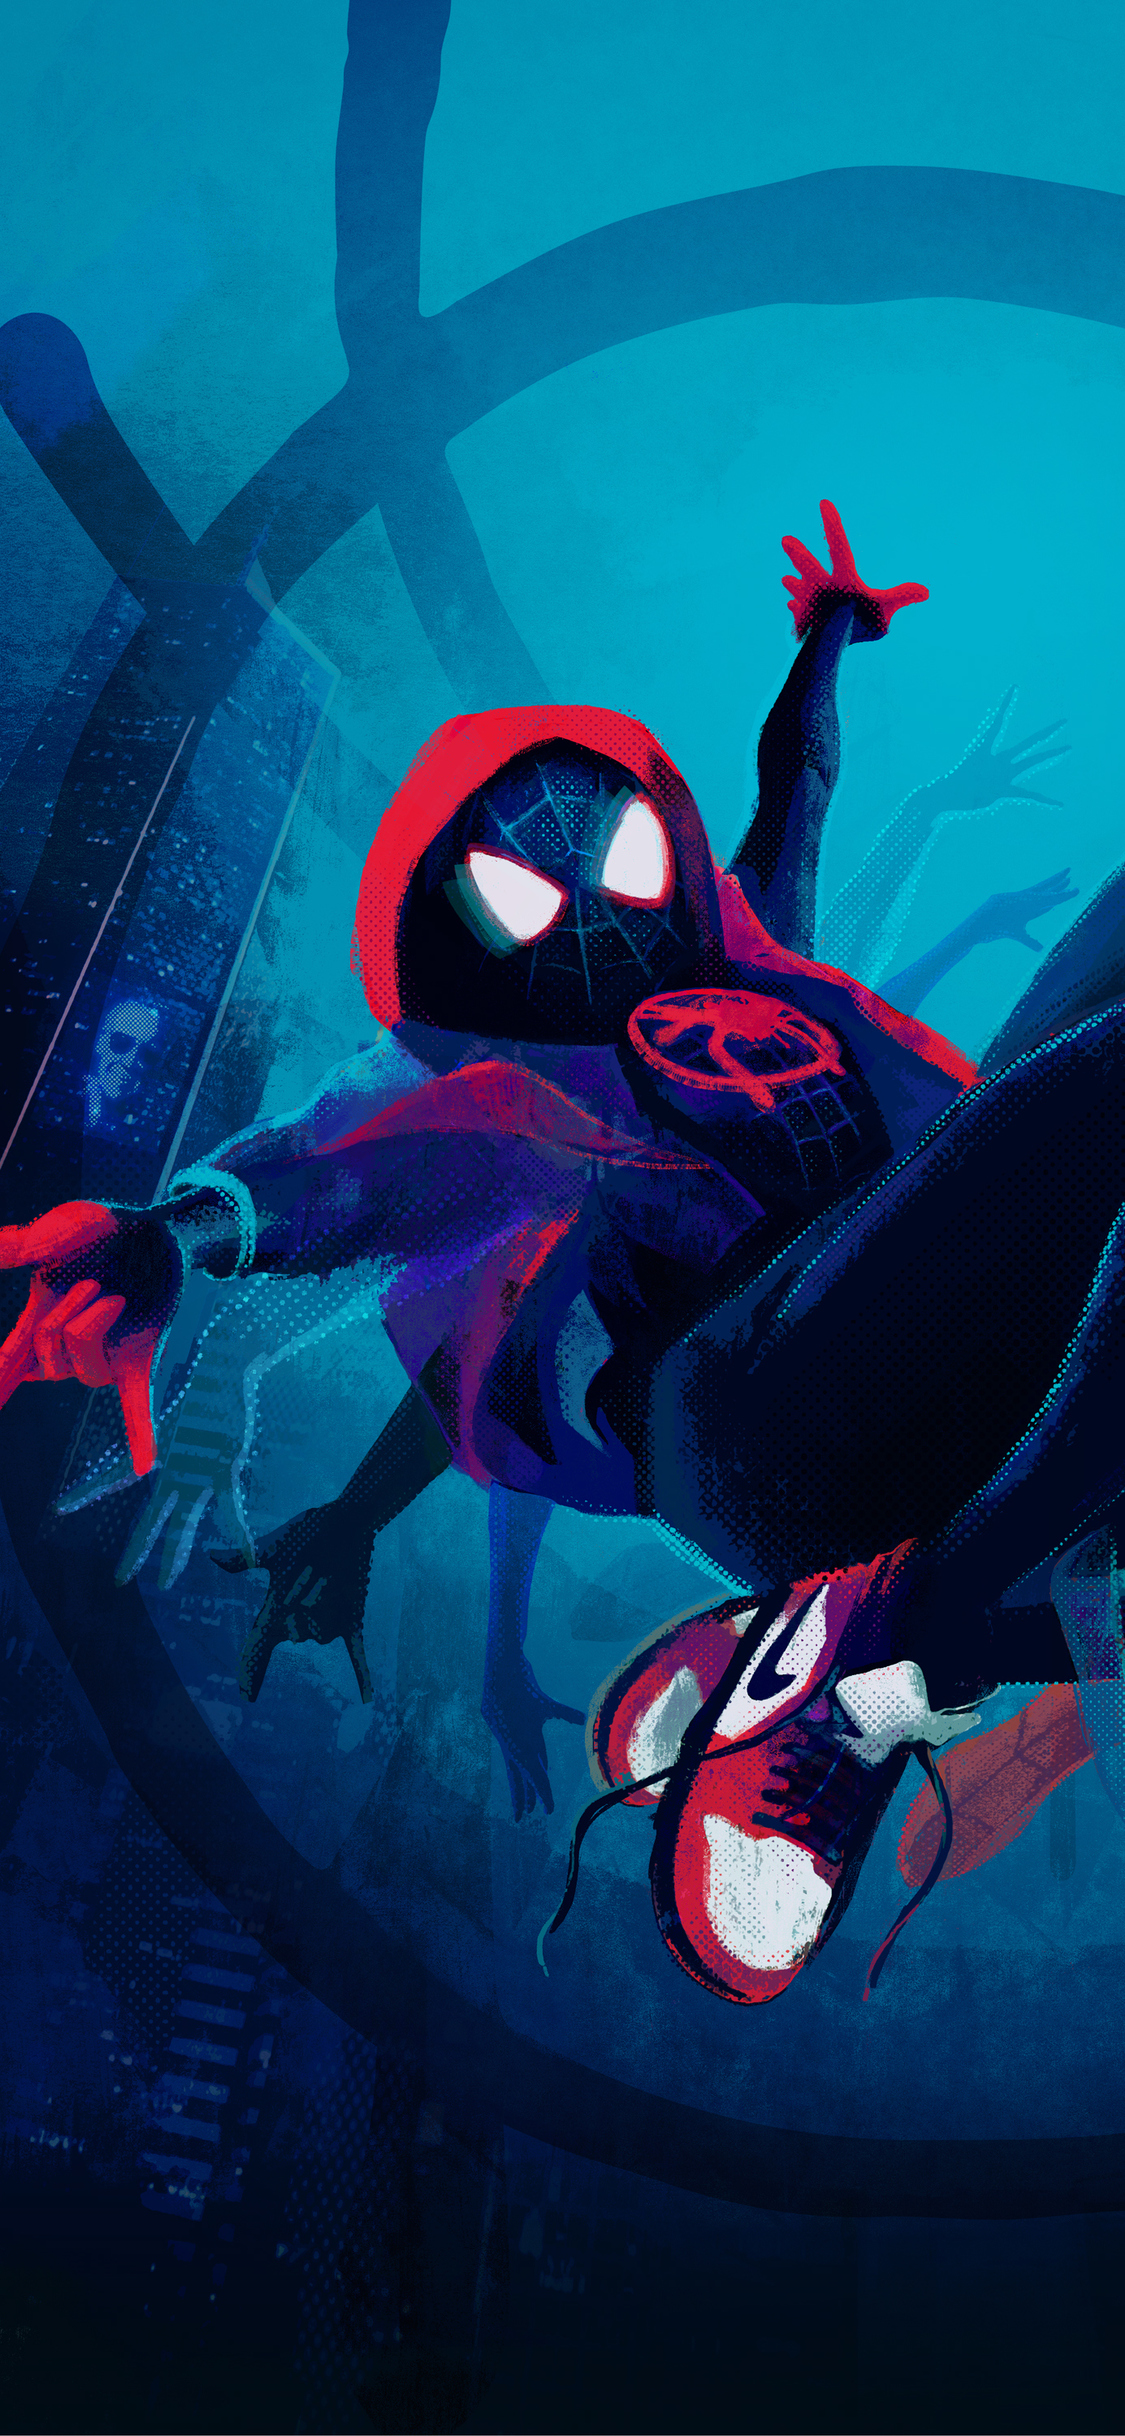 SpiderMan Into The Spider Verse New Artwork iPhone